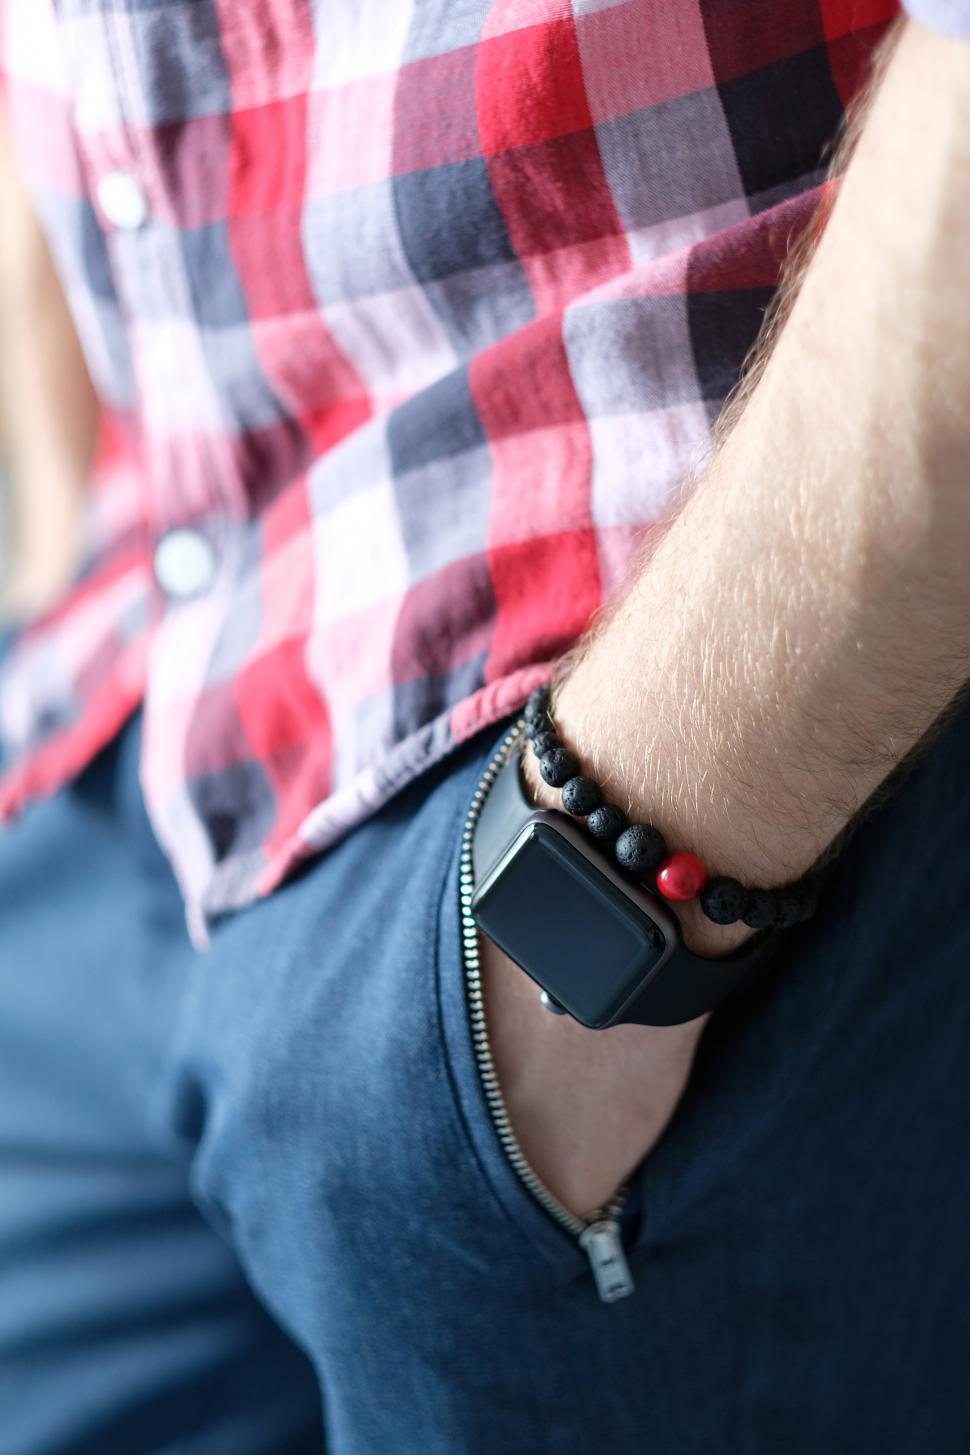 Free Image of Watch on hand in pocket. Smartwatch. 